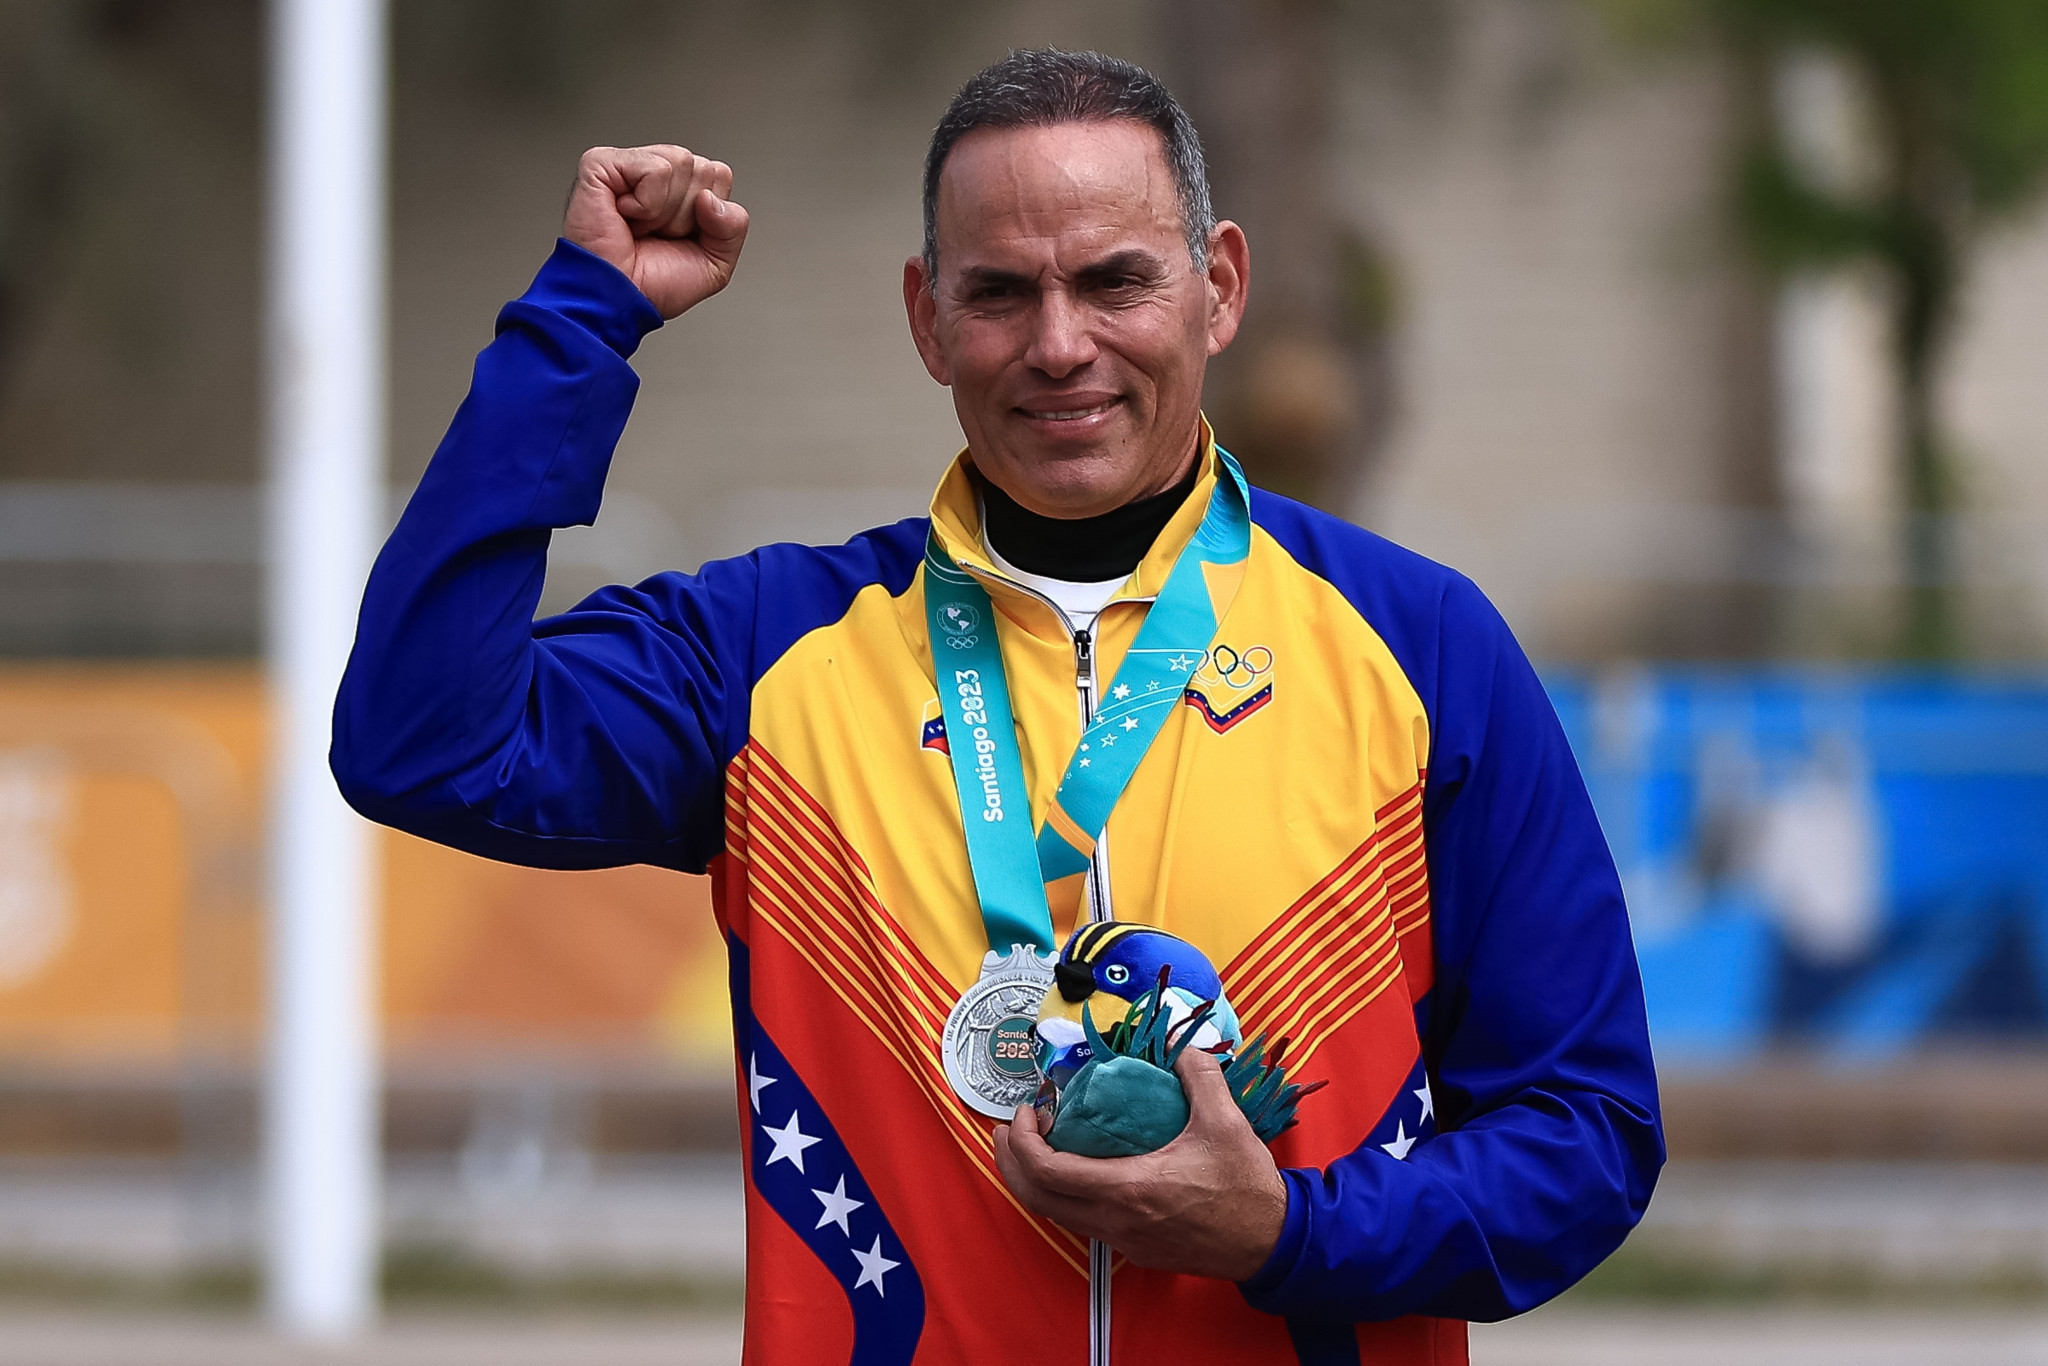 Leonel Martinez is set to compete at Paris 2024 at the age of 60 ©Getty Images